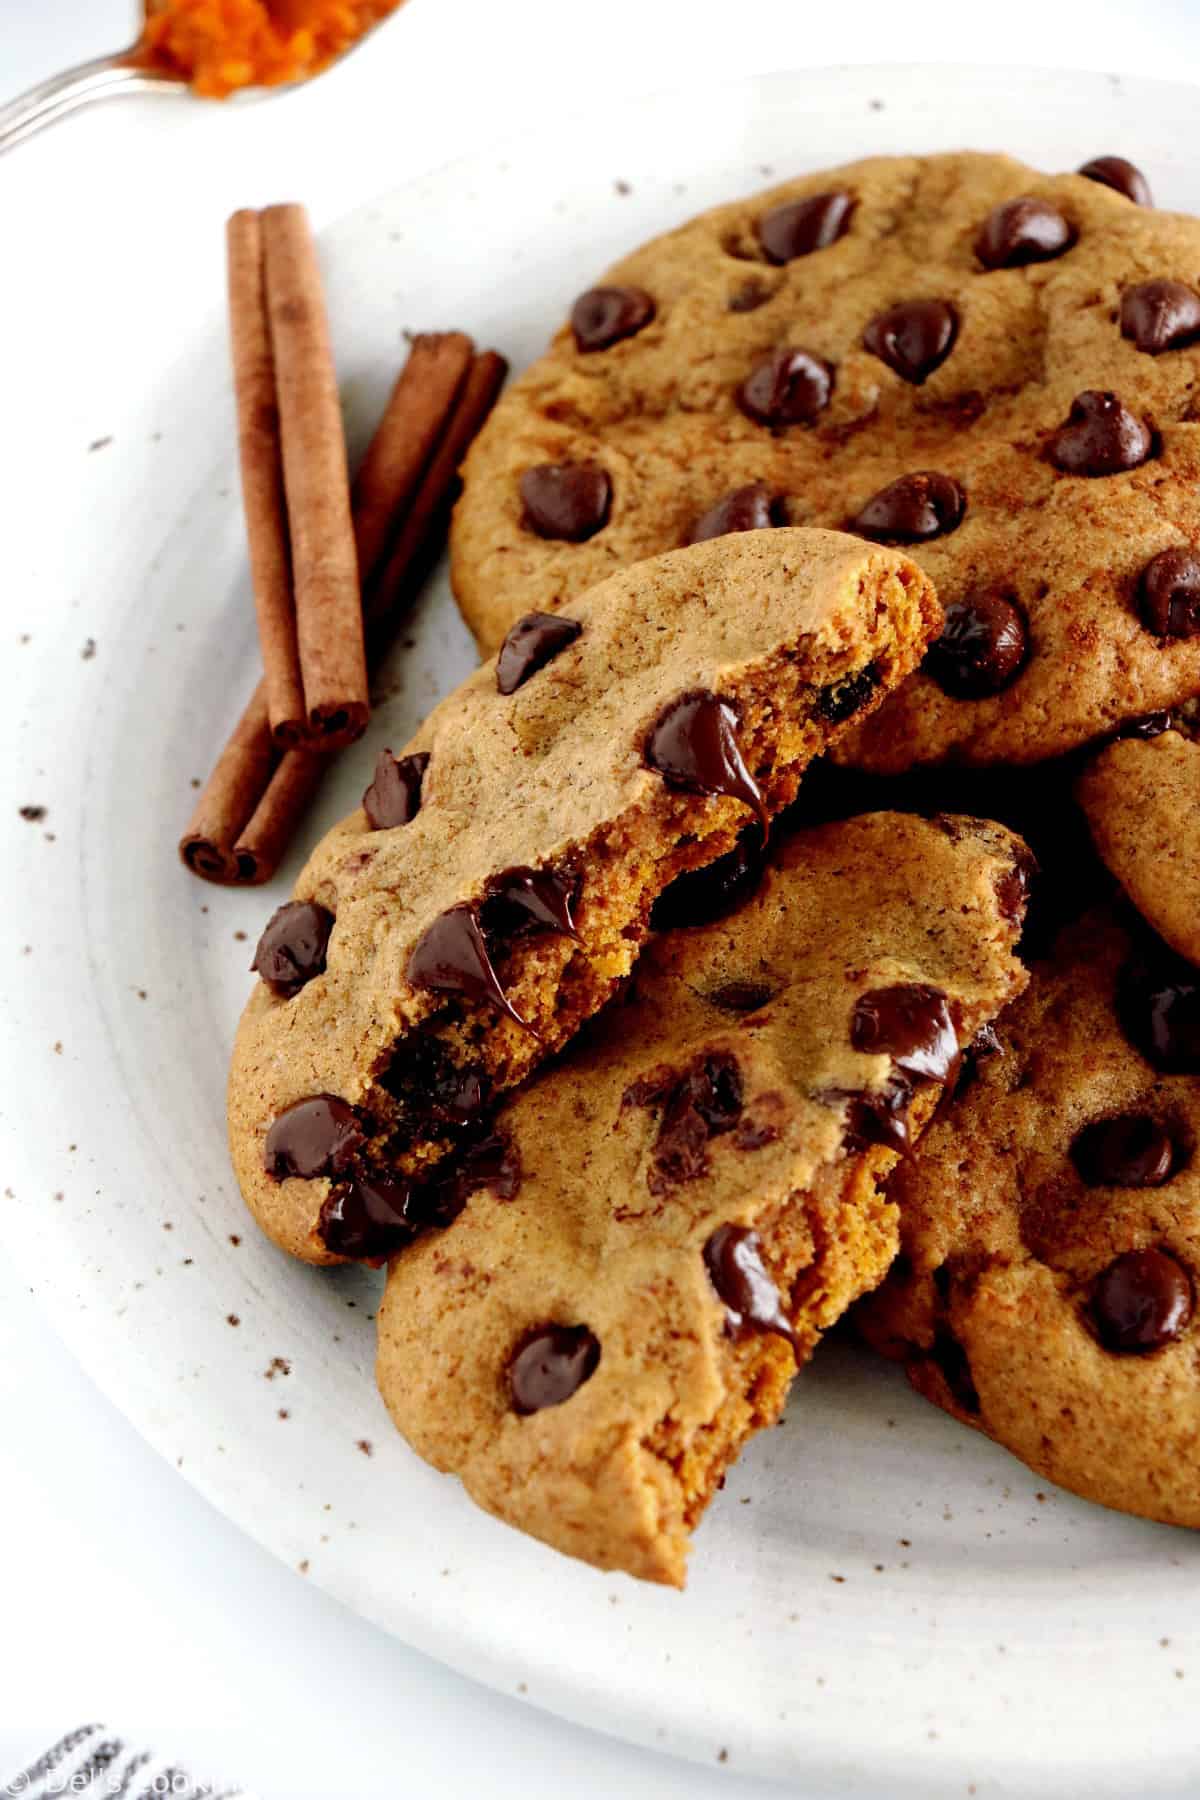 Best ever Pumpkin Chocolate Chip Cookies. Soft and chewy in texture (not cakey), loaded with chocolate chips and packed with cozy spices. A must try this fall!